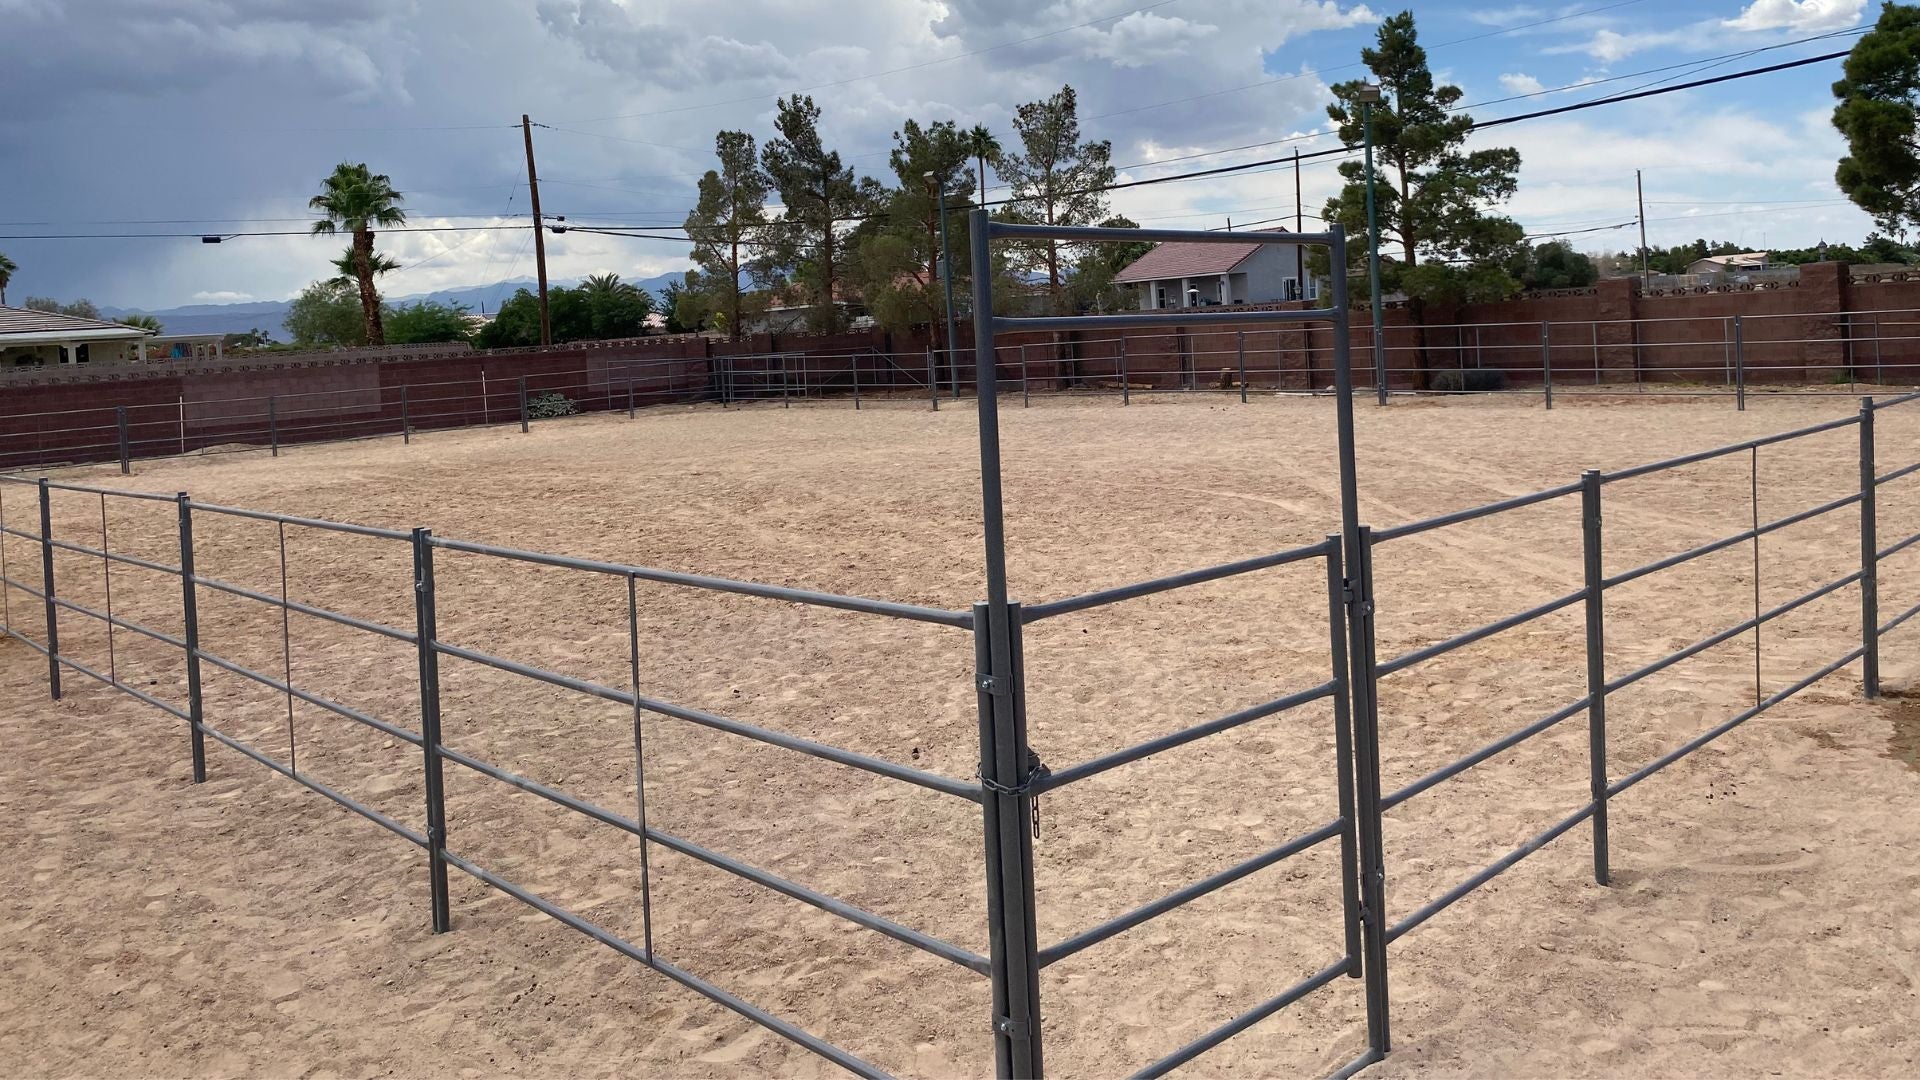 Making Equestrian Dreams Come True: SoCal Fence and Barn Builds Amazing Horse Arena Panels and Kits for Sale